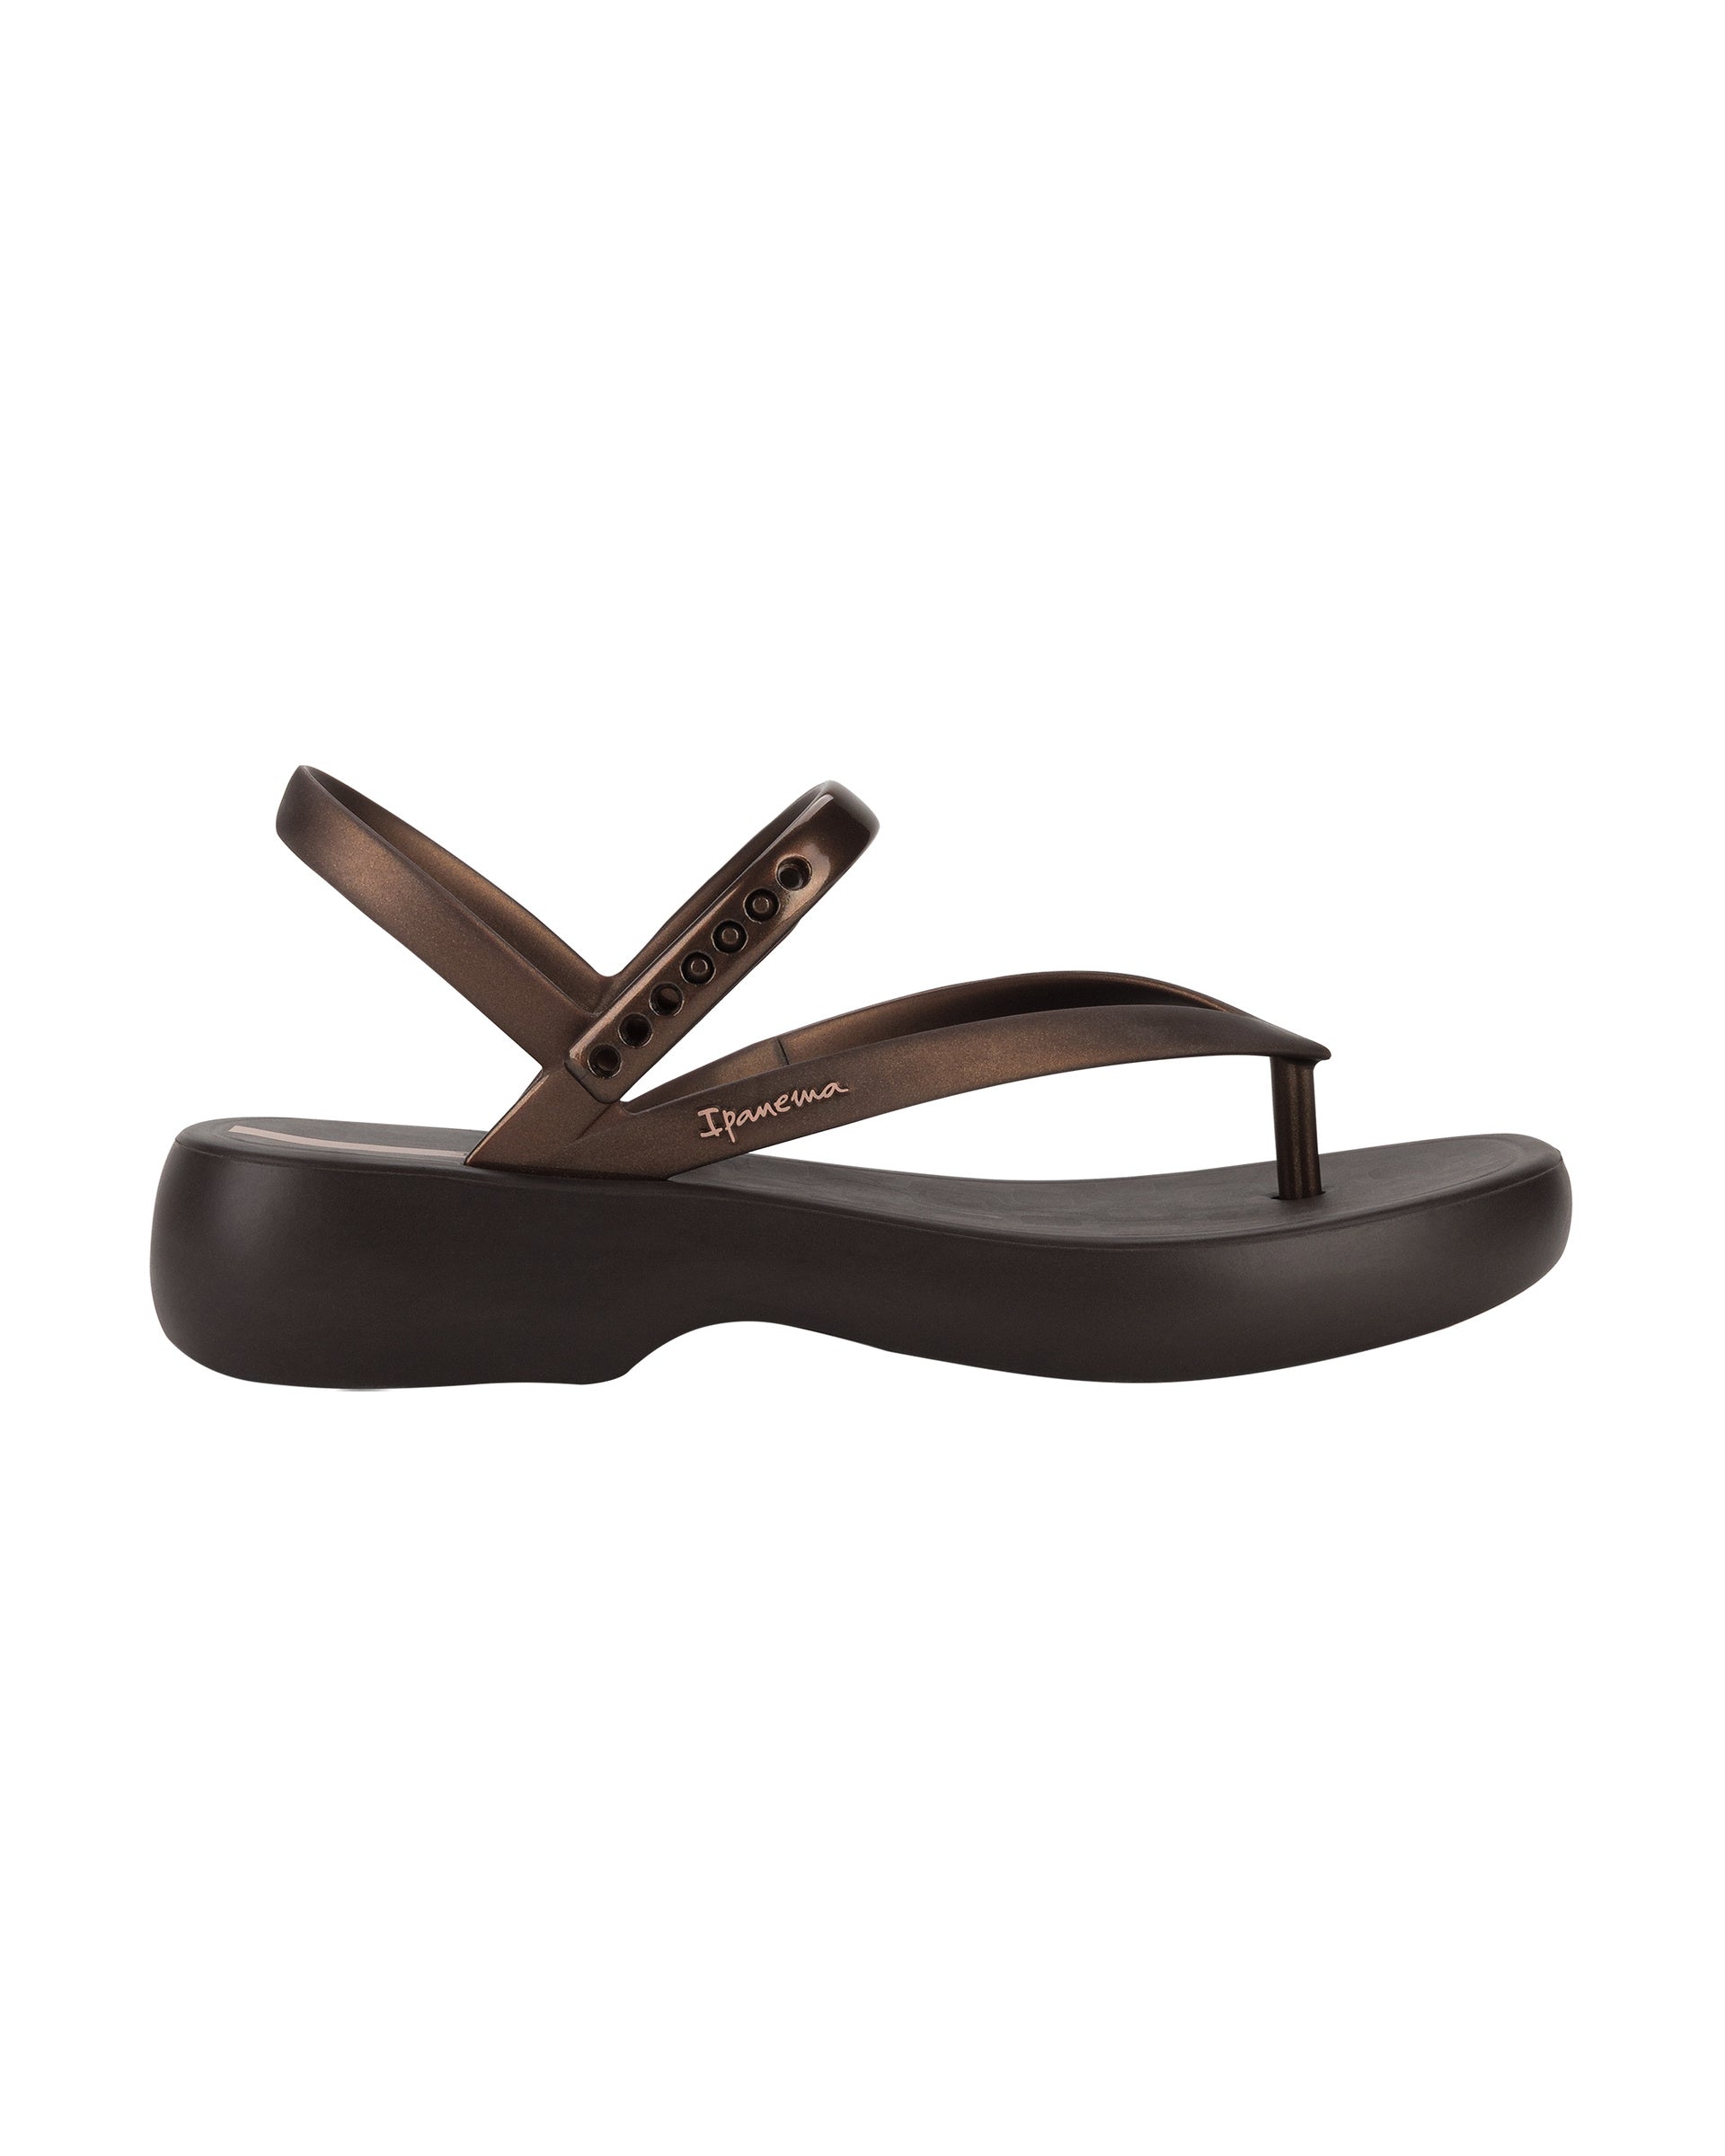 Outer side view of a brown Ipanema Verano women's sandal.